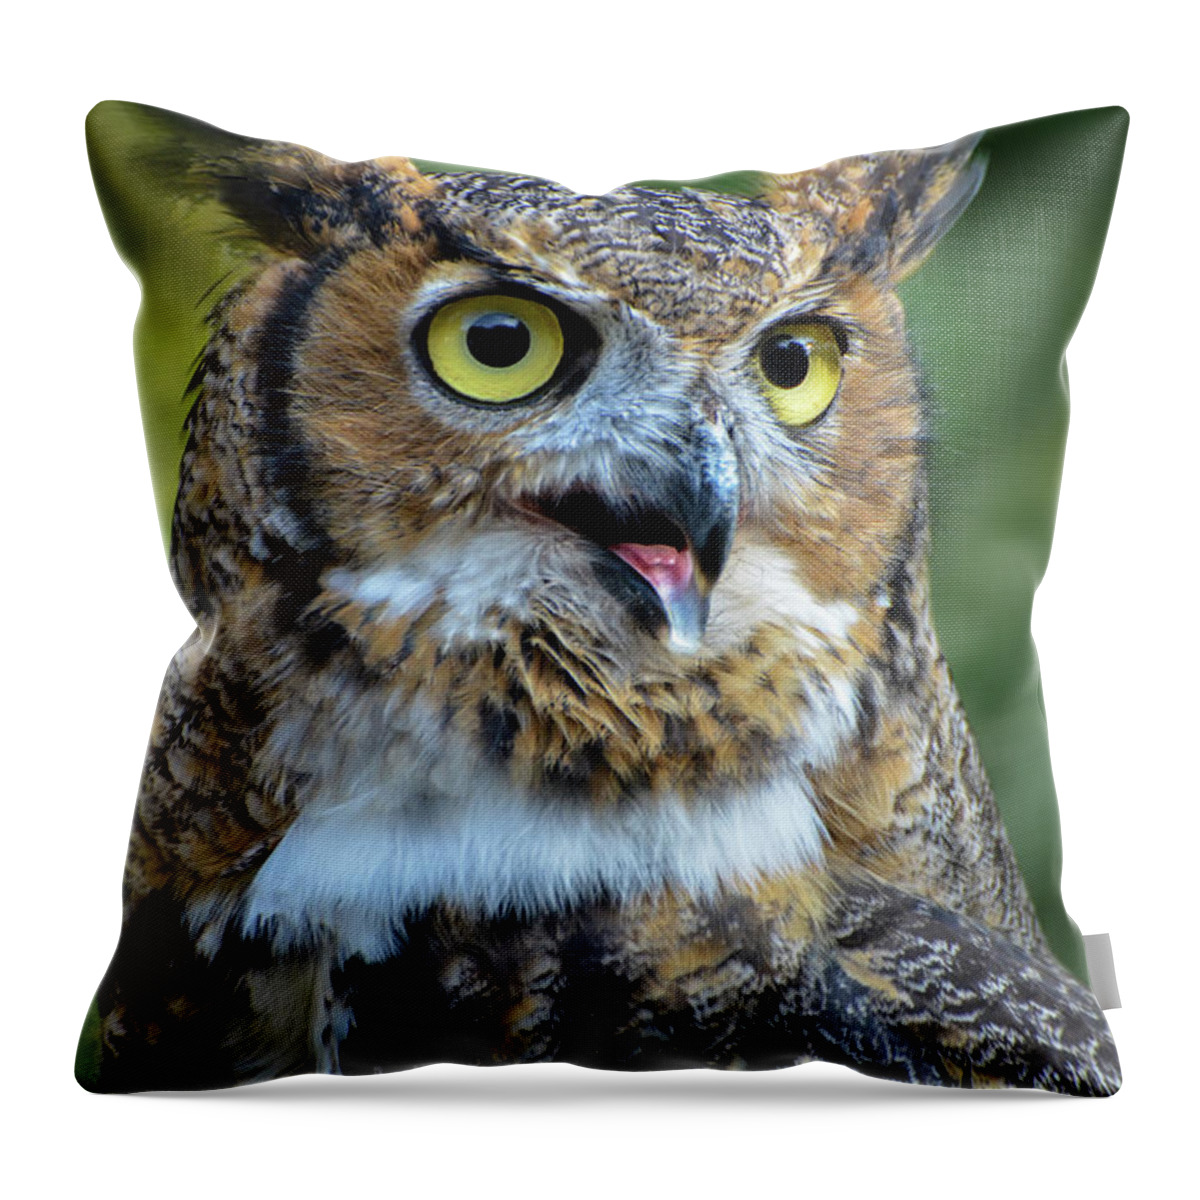 Great Horned Owl Throw Pillow featuring the photograph Great Horned Owl Smiling by Amy Porter